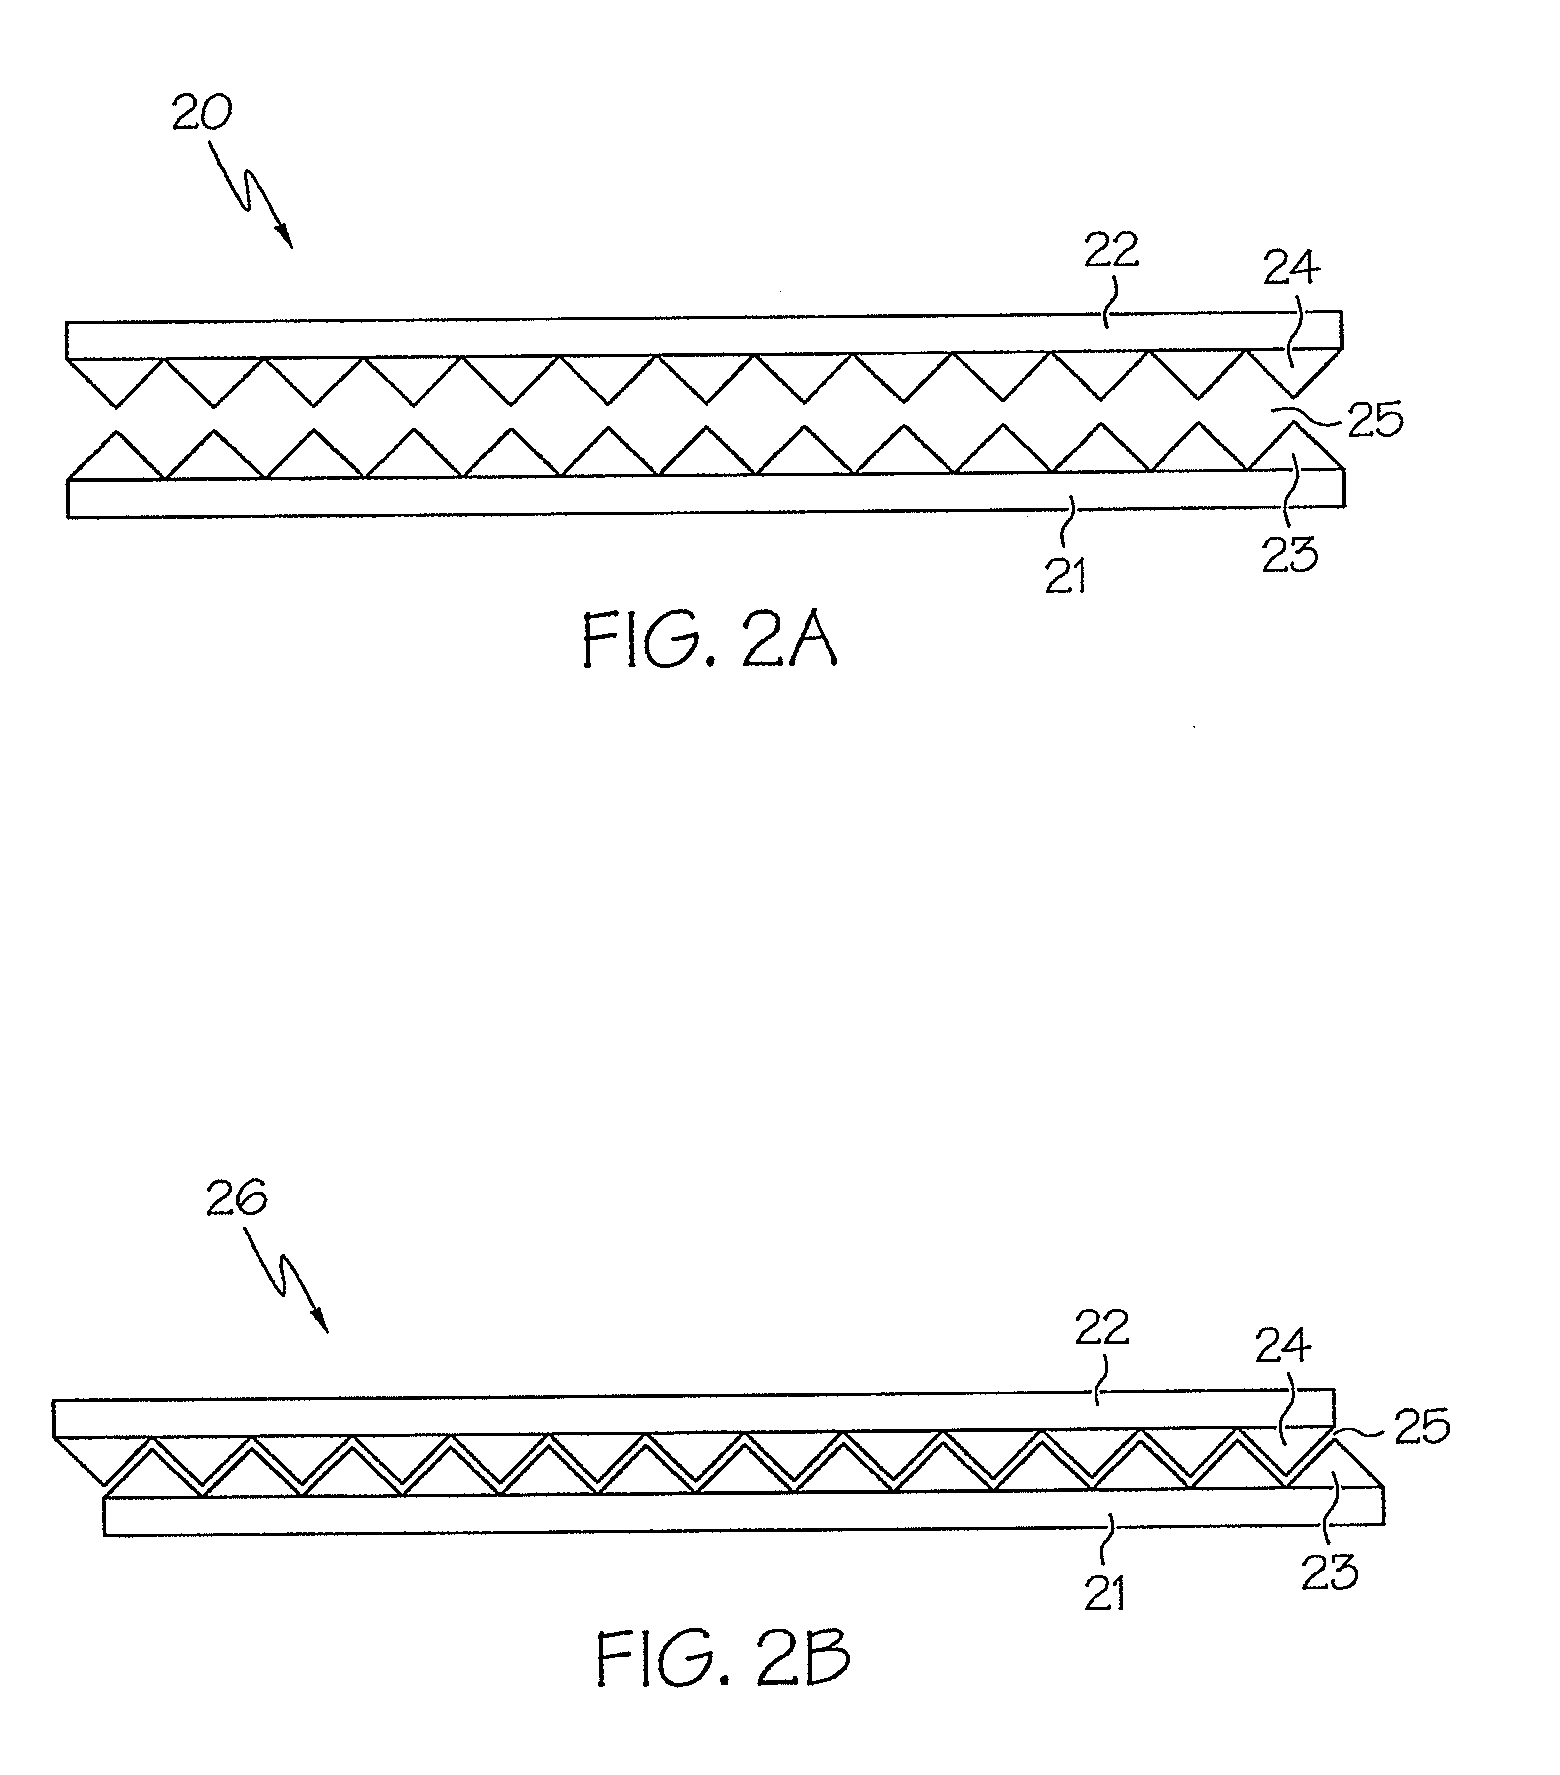 Retroreflective structures having a helical geometry